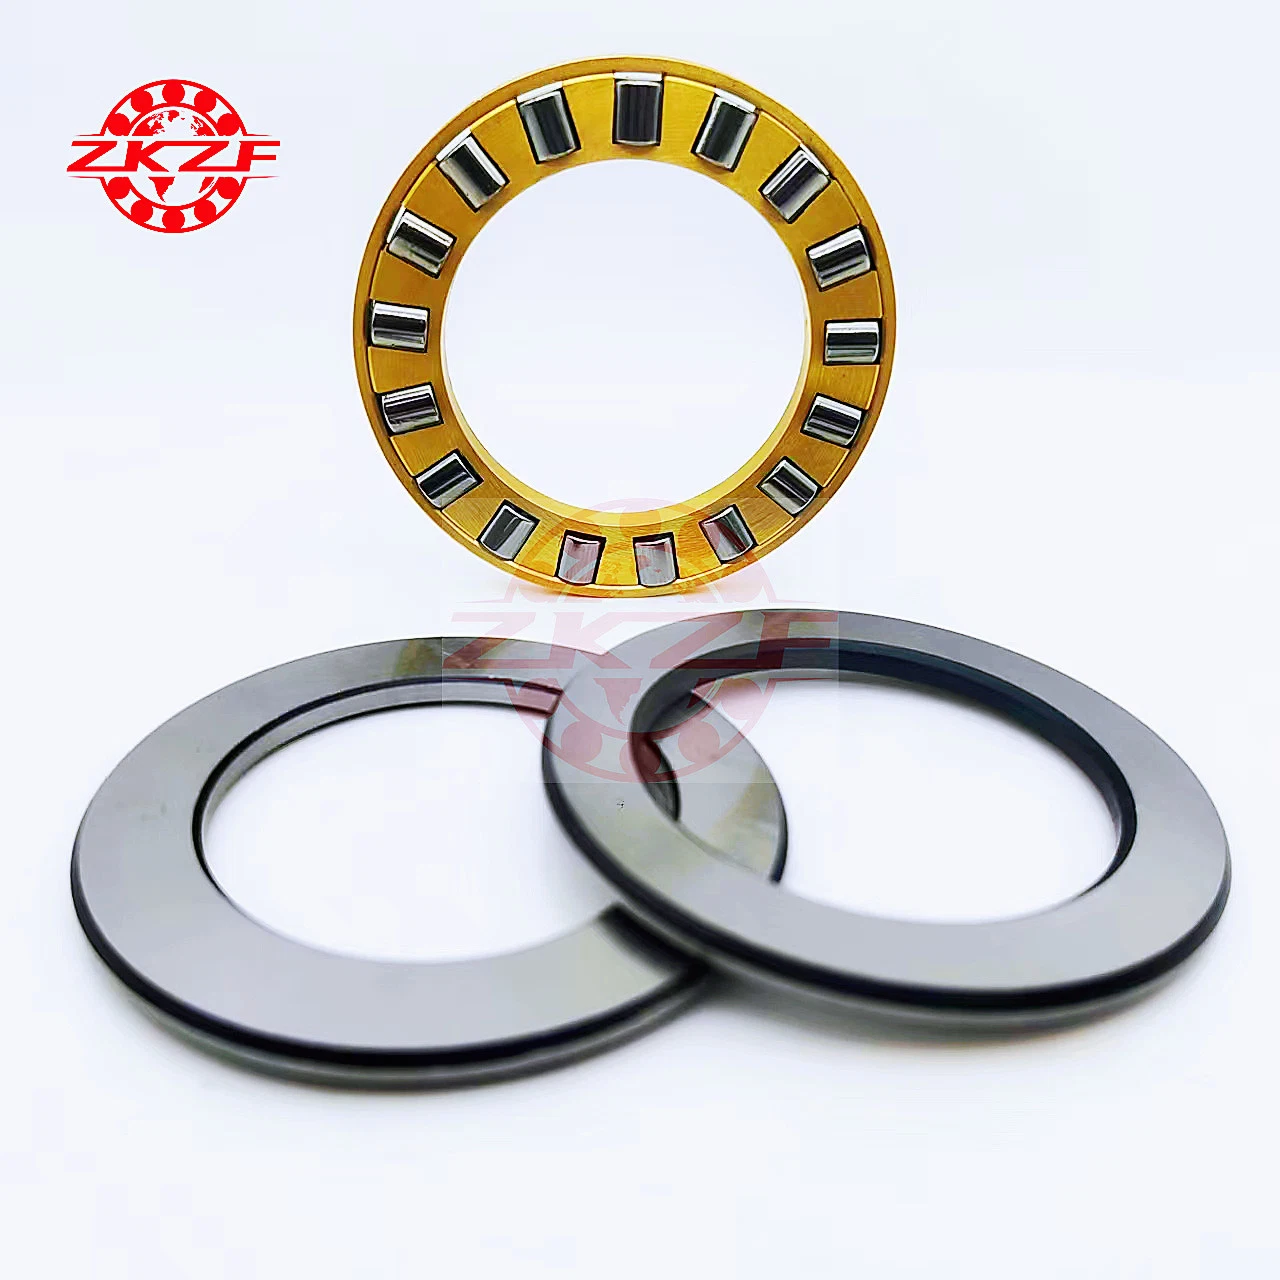 Plane Thrust Cylindrical Roller Bearing 89428-M 81238-M 89322-M 89320-M 89324-M Full Sizes of Roller Bearings for Auto Parts